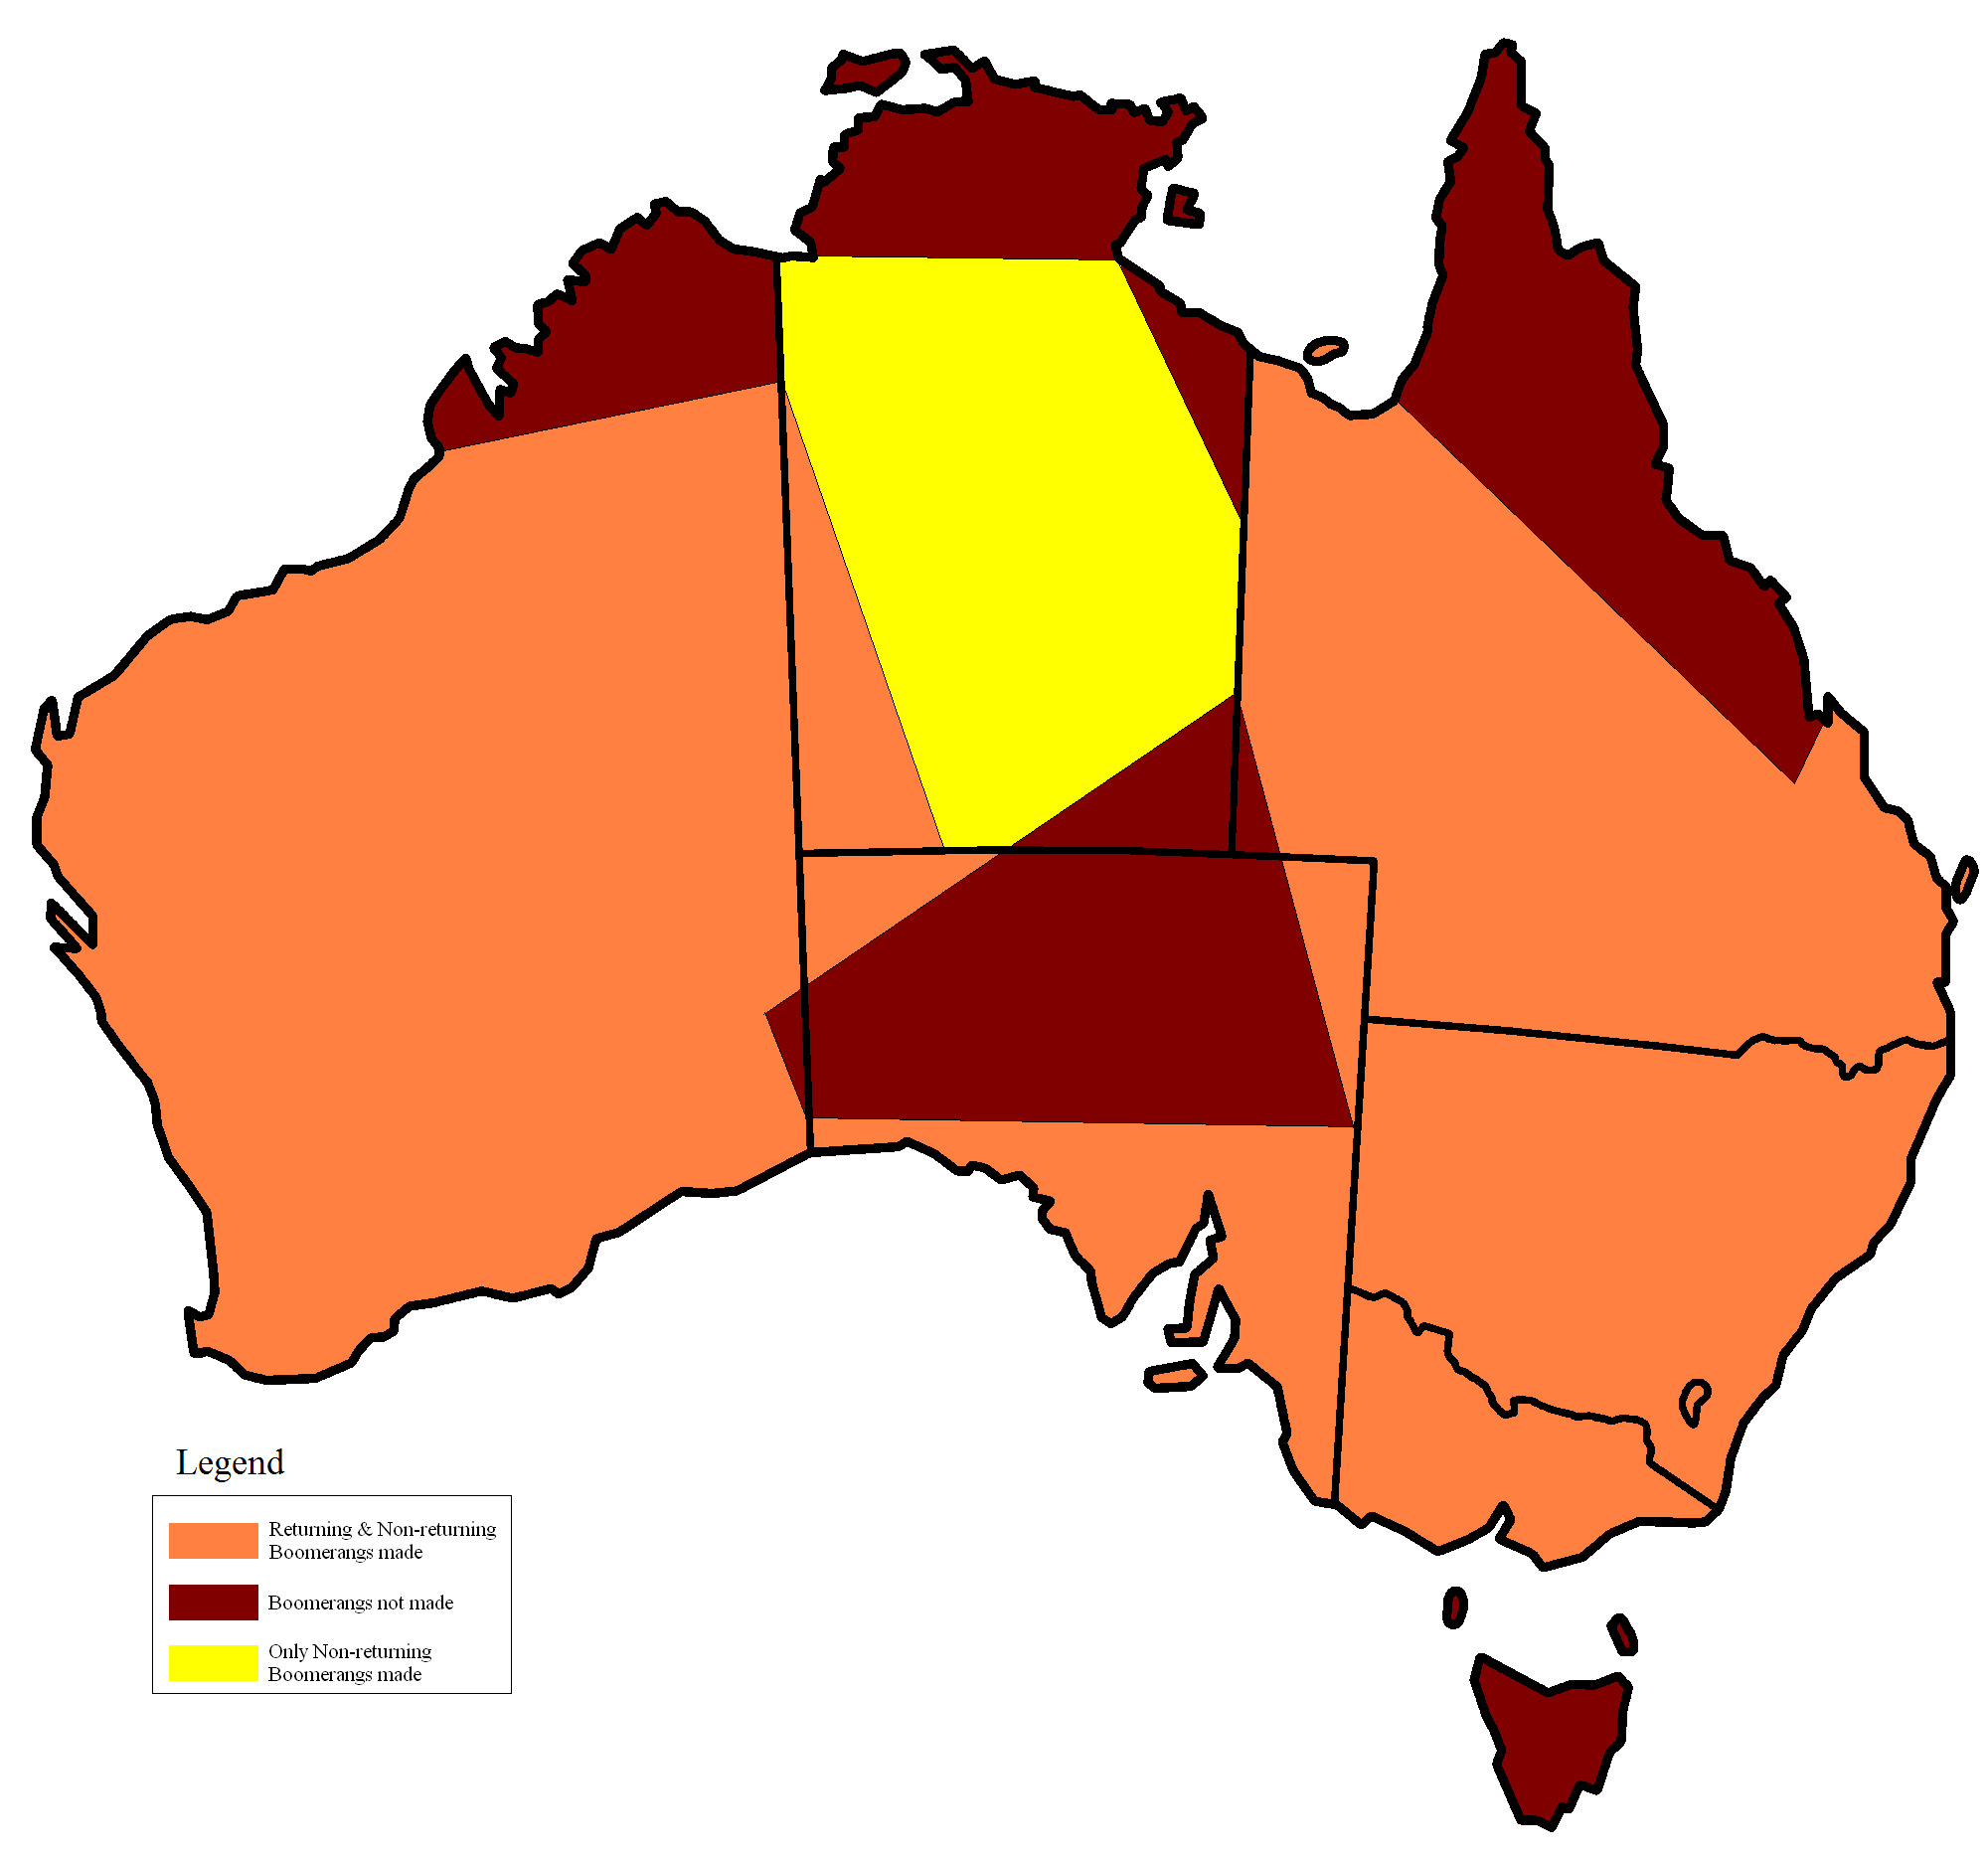 <p>Map of Australia showing the distribution of boomerangs</p>
